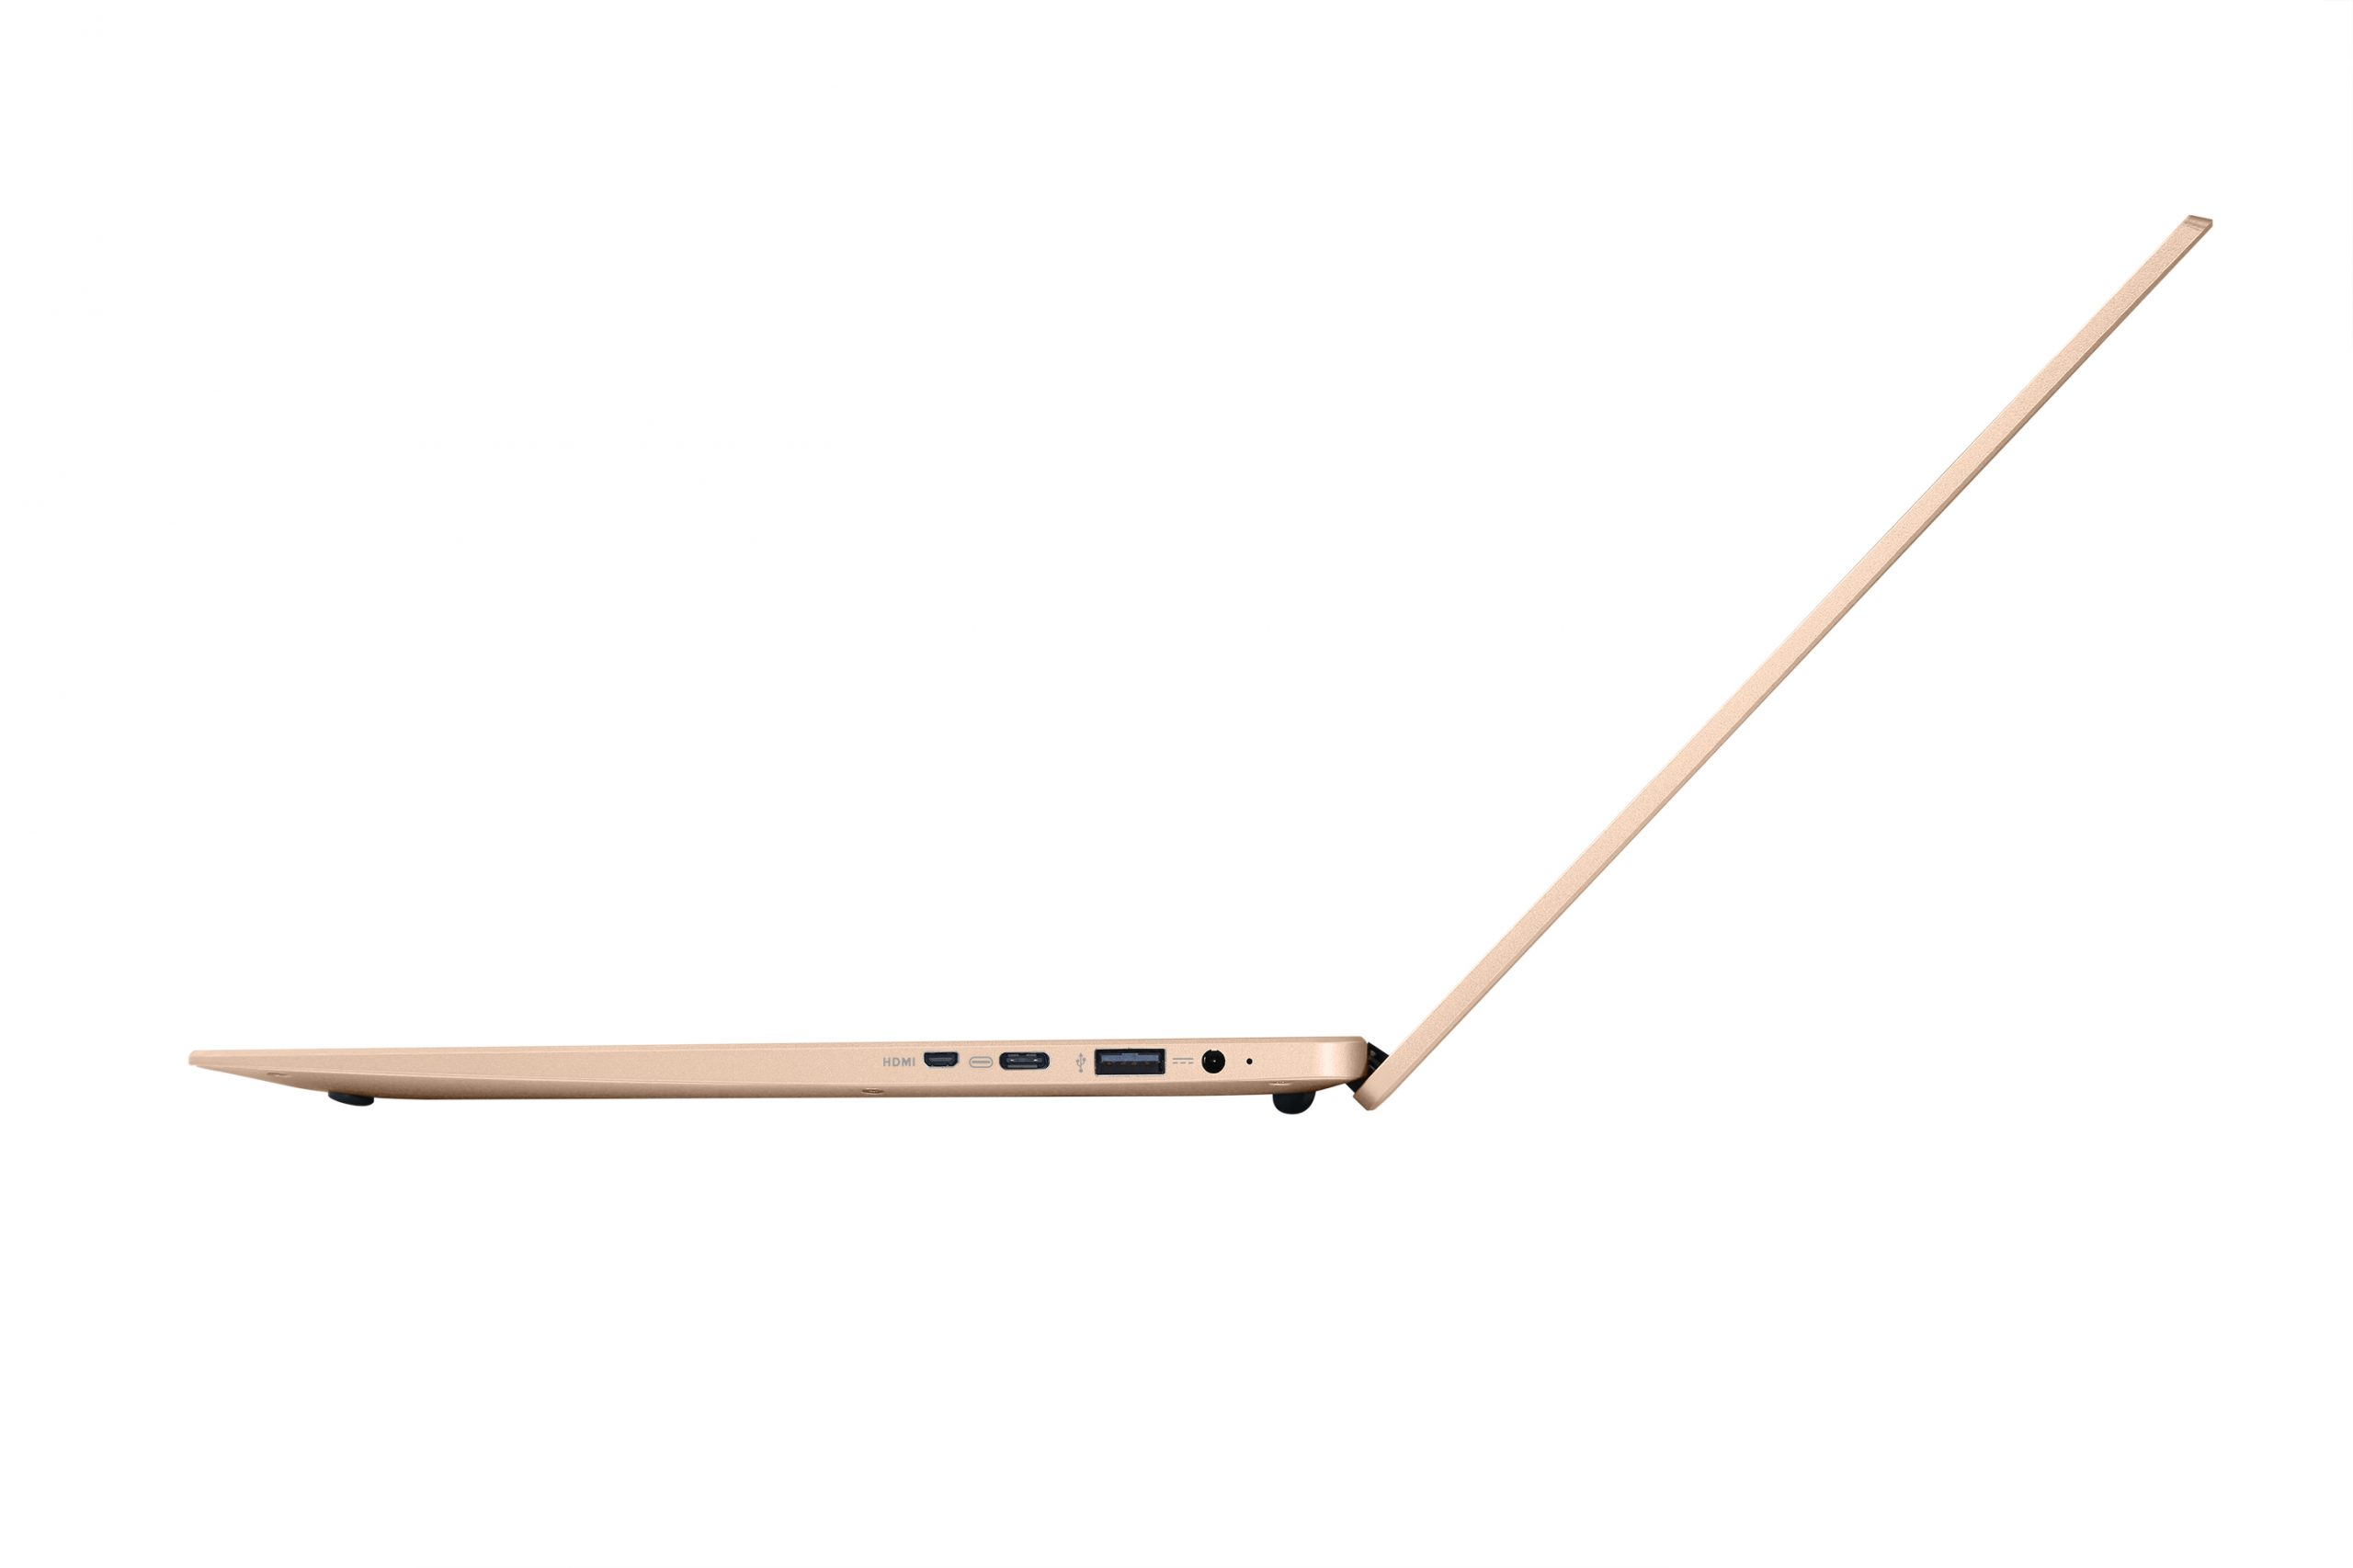 https://t2qwifi.com/wp-content/uploads/2020/07/avita_laptop_2020_angle10_0021_high_champagne-gold-scaled.jpg